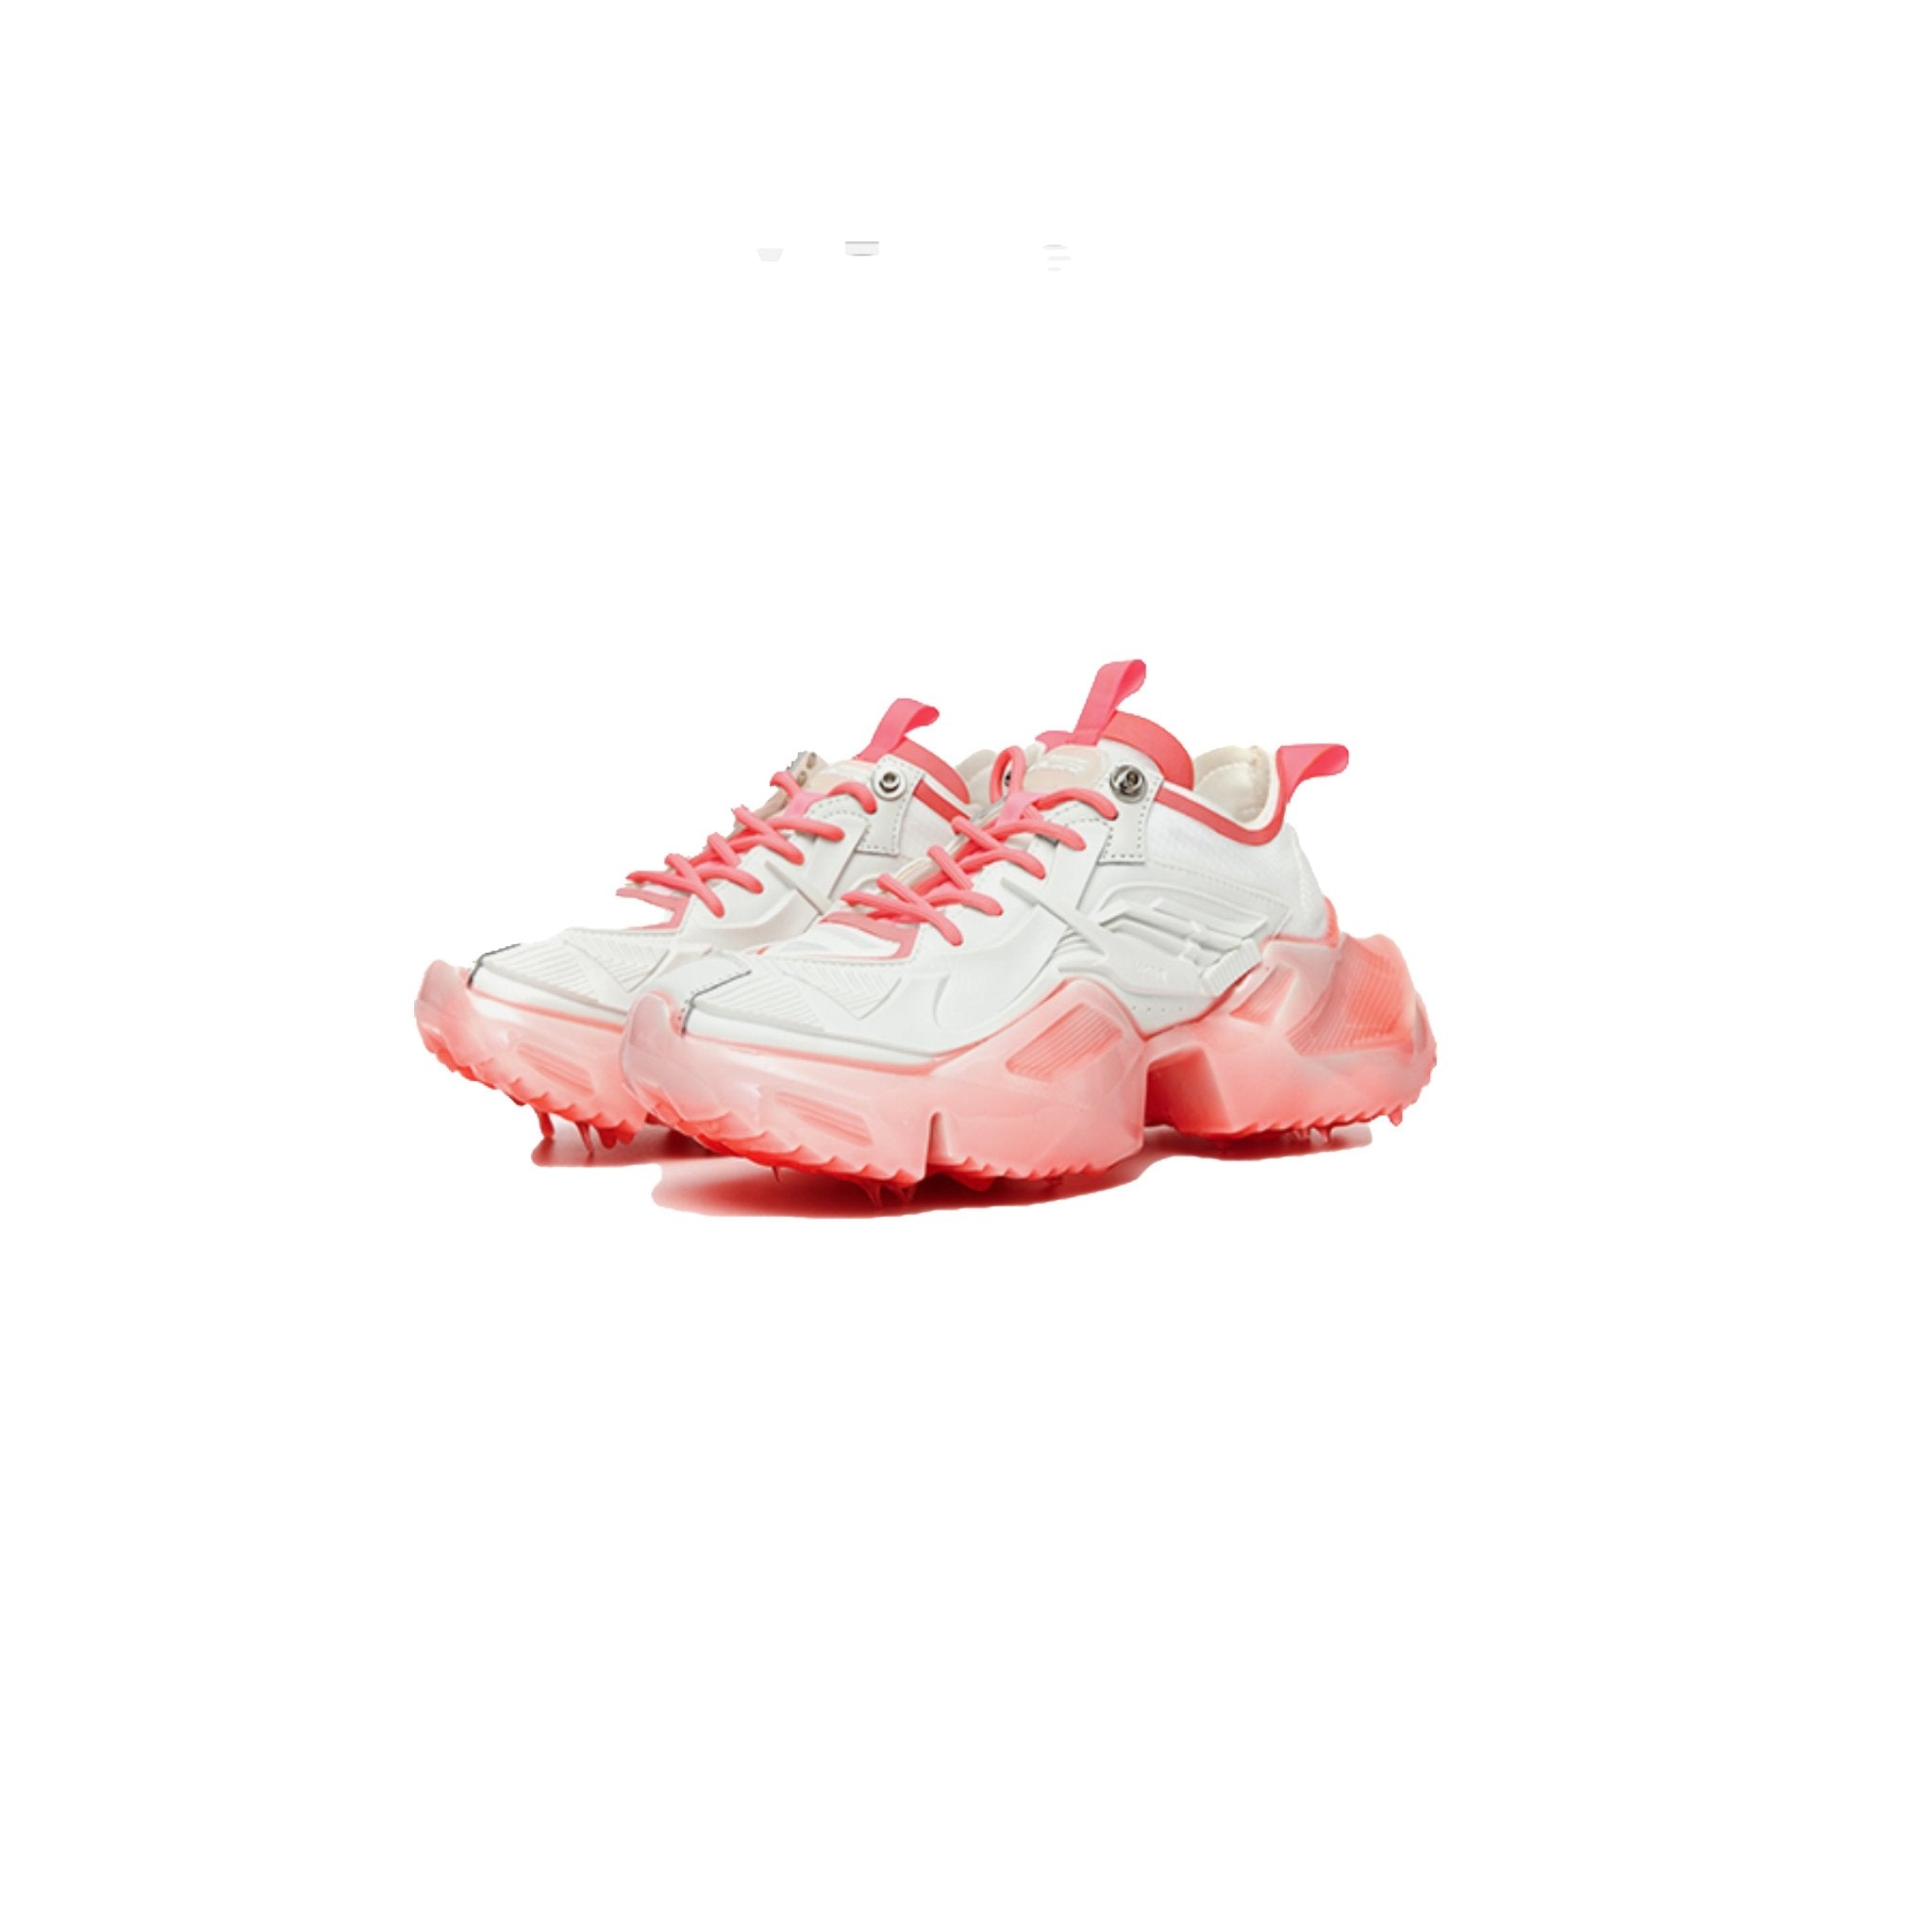 OGR MECHA Rong Classic 3D Sneaker Light Pink | MADA IN CHINA